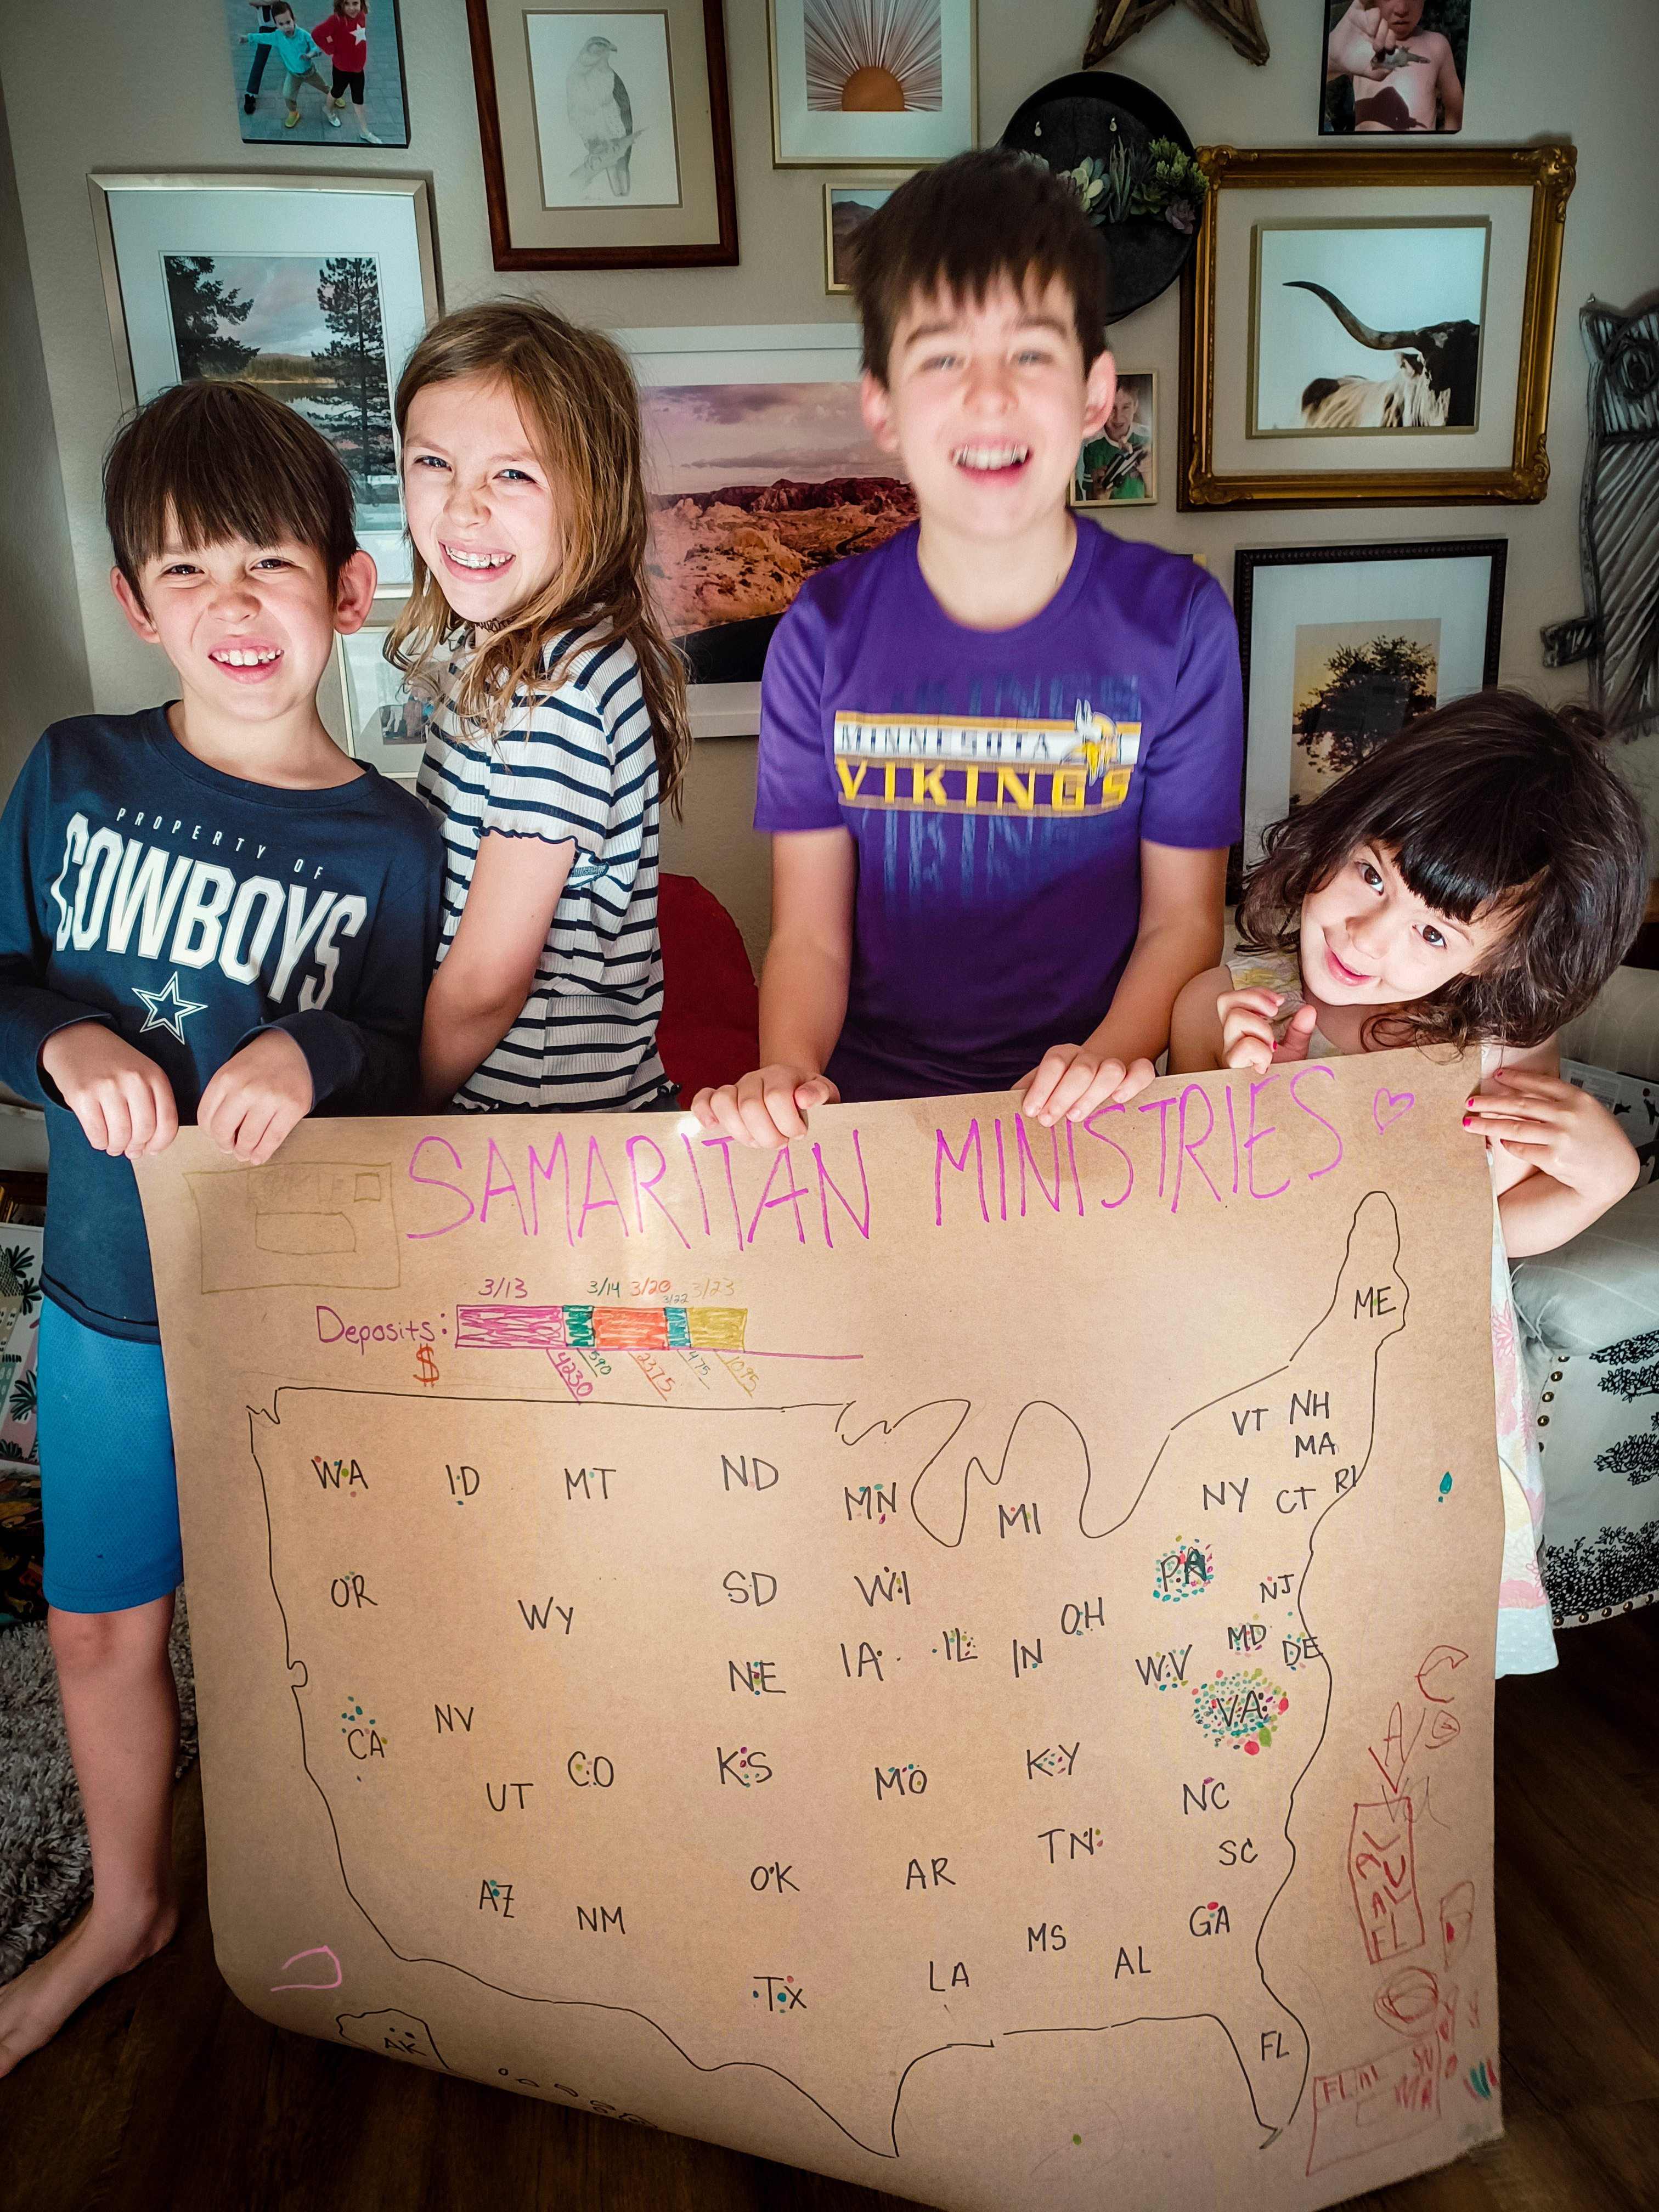 The Oesch children kept track of Shares received.